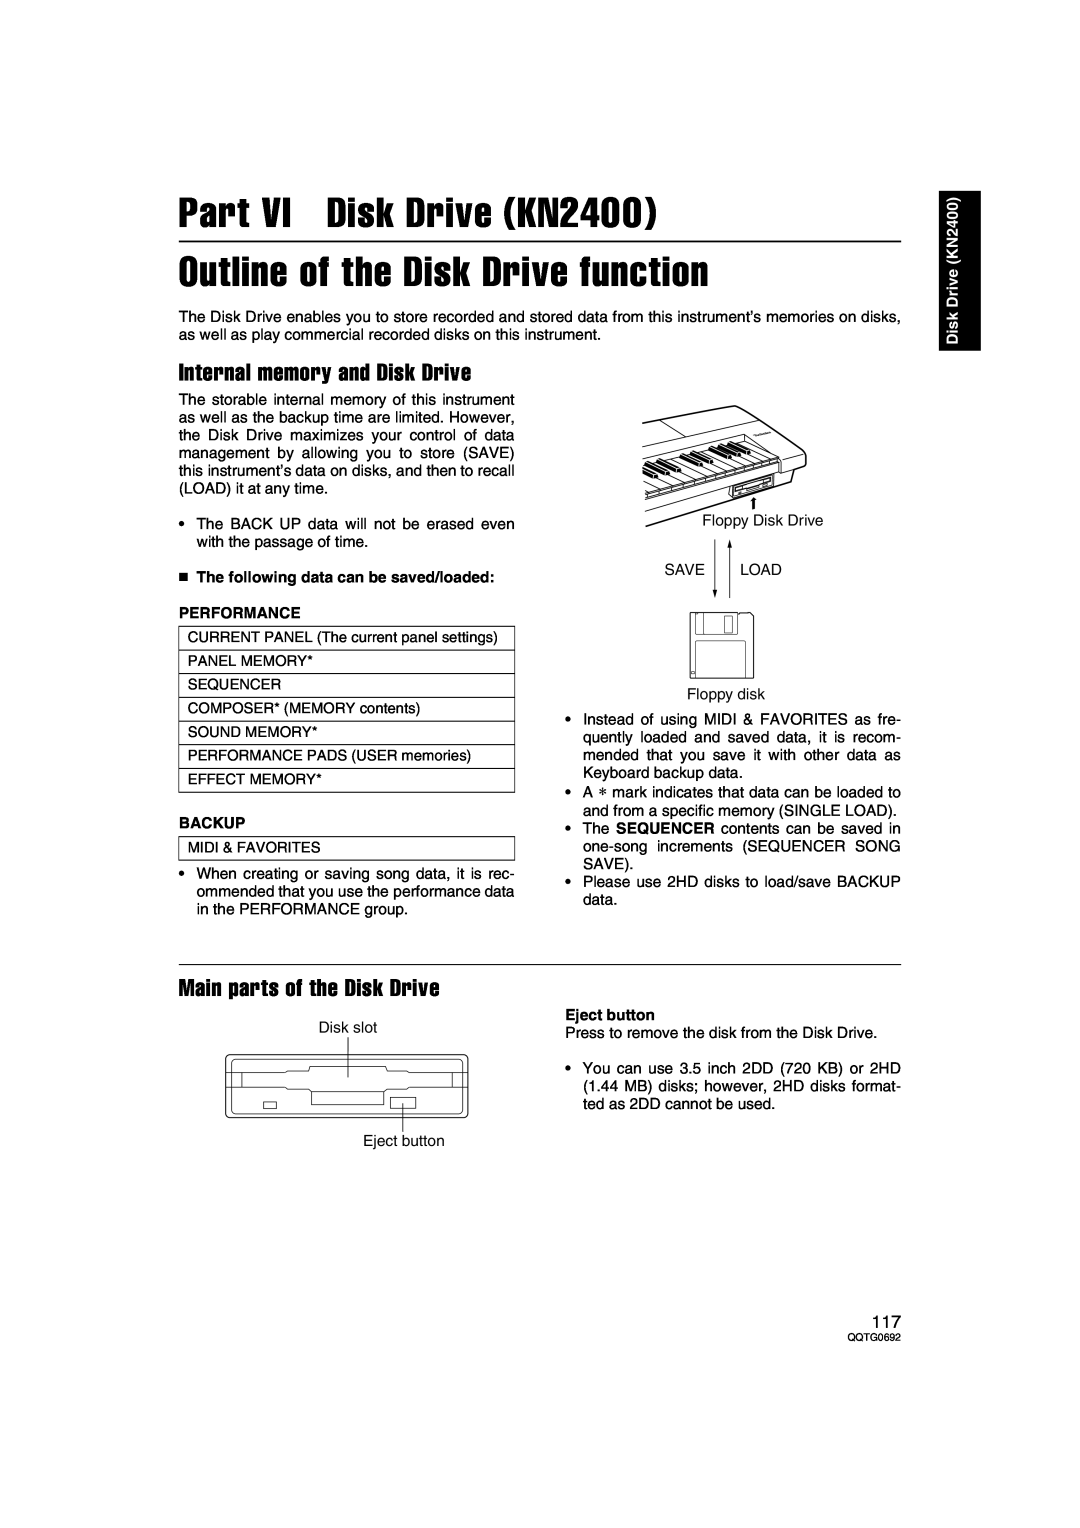 Panasonic SX-KN2400 Part VI Disk Drive KN2400 Outline of the Disk Drive function, Internal memory and Disk Drive, Backup 